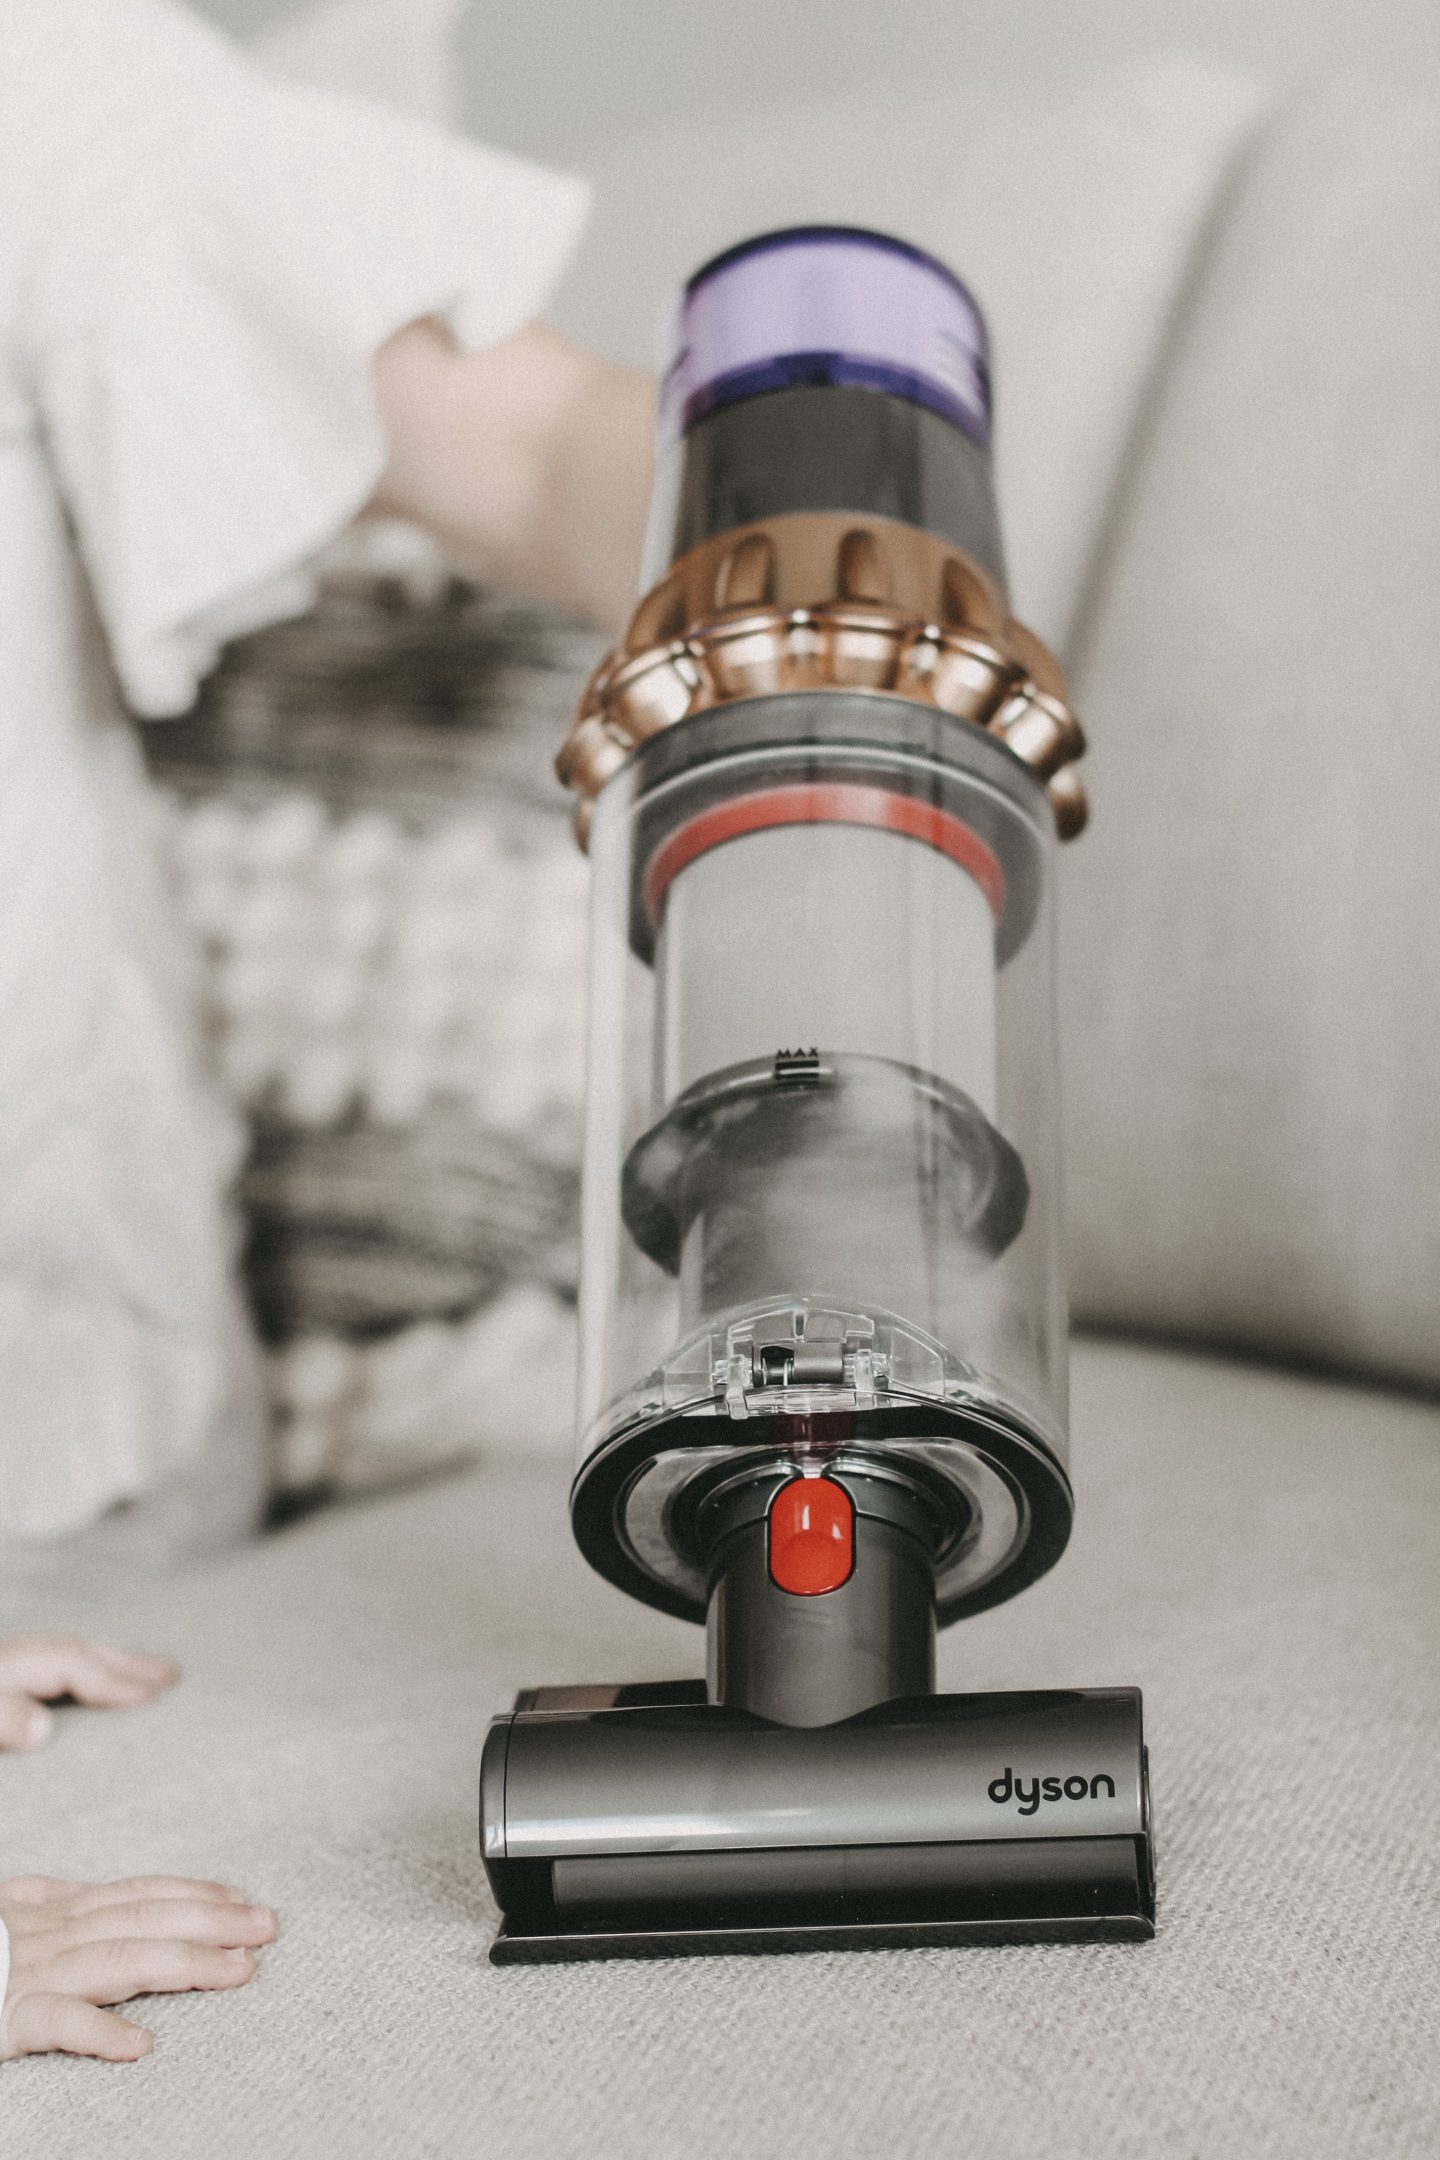 Dyson V11 absolute pro – EASY and INTELLIGENT